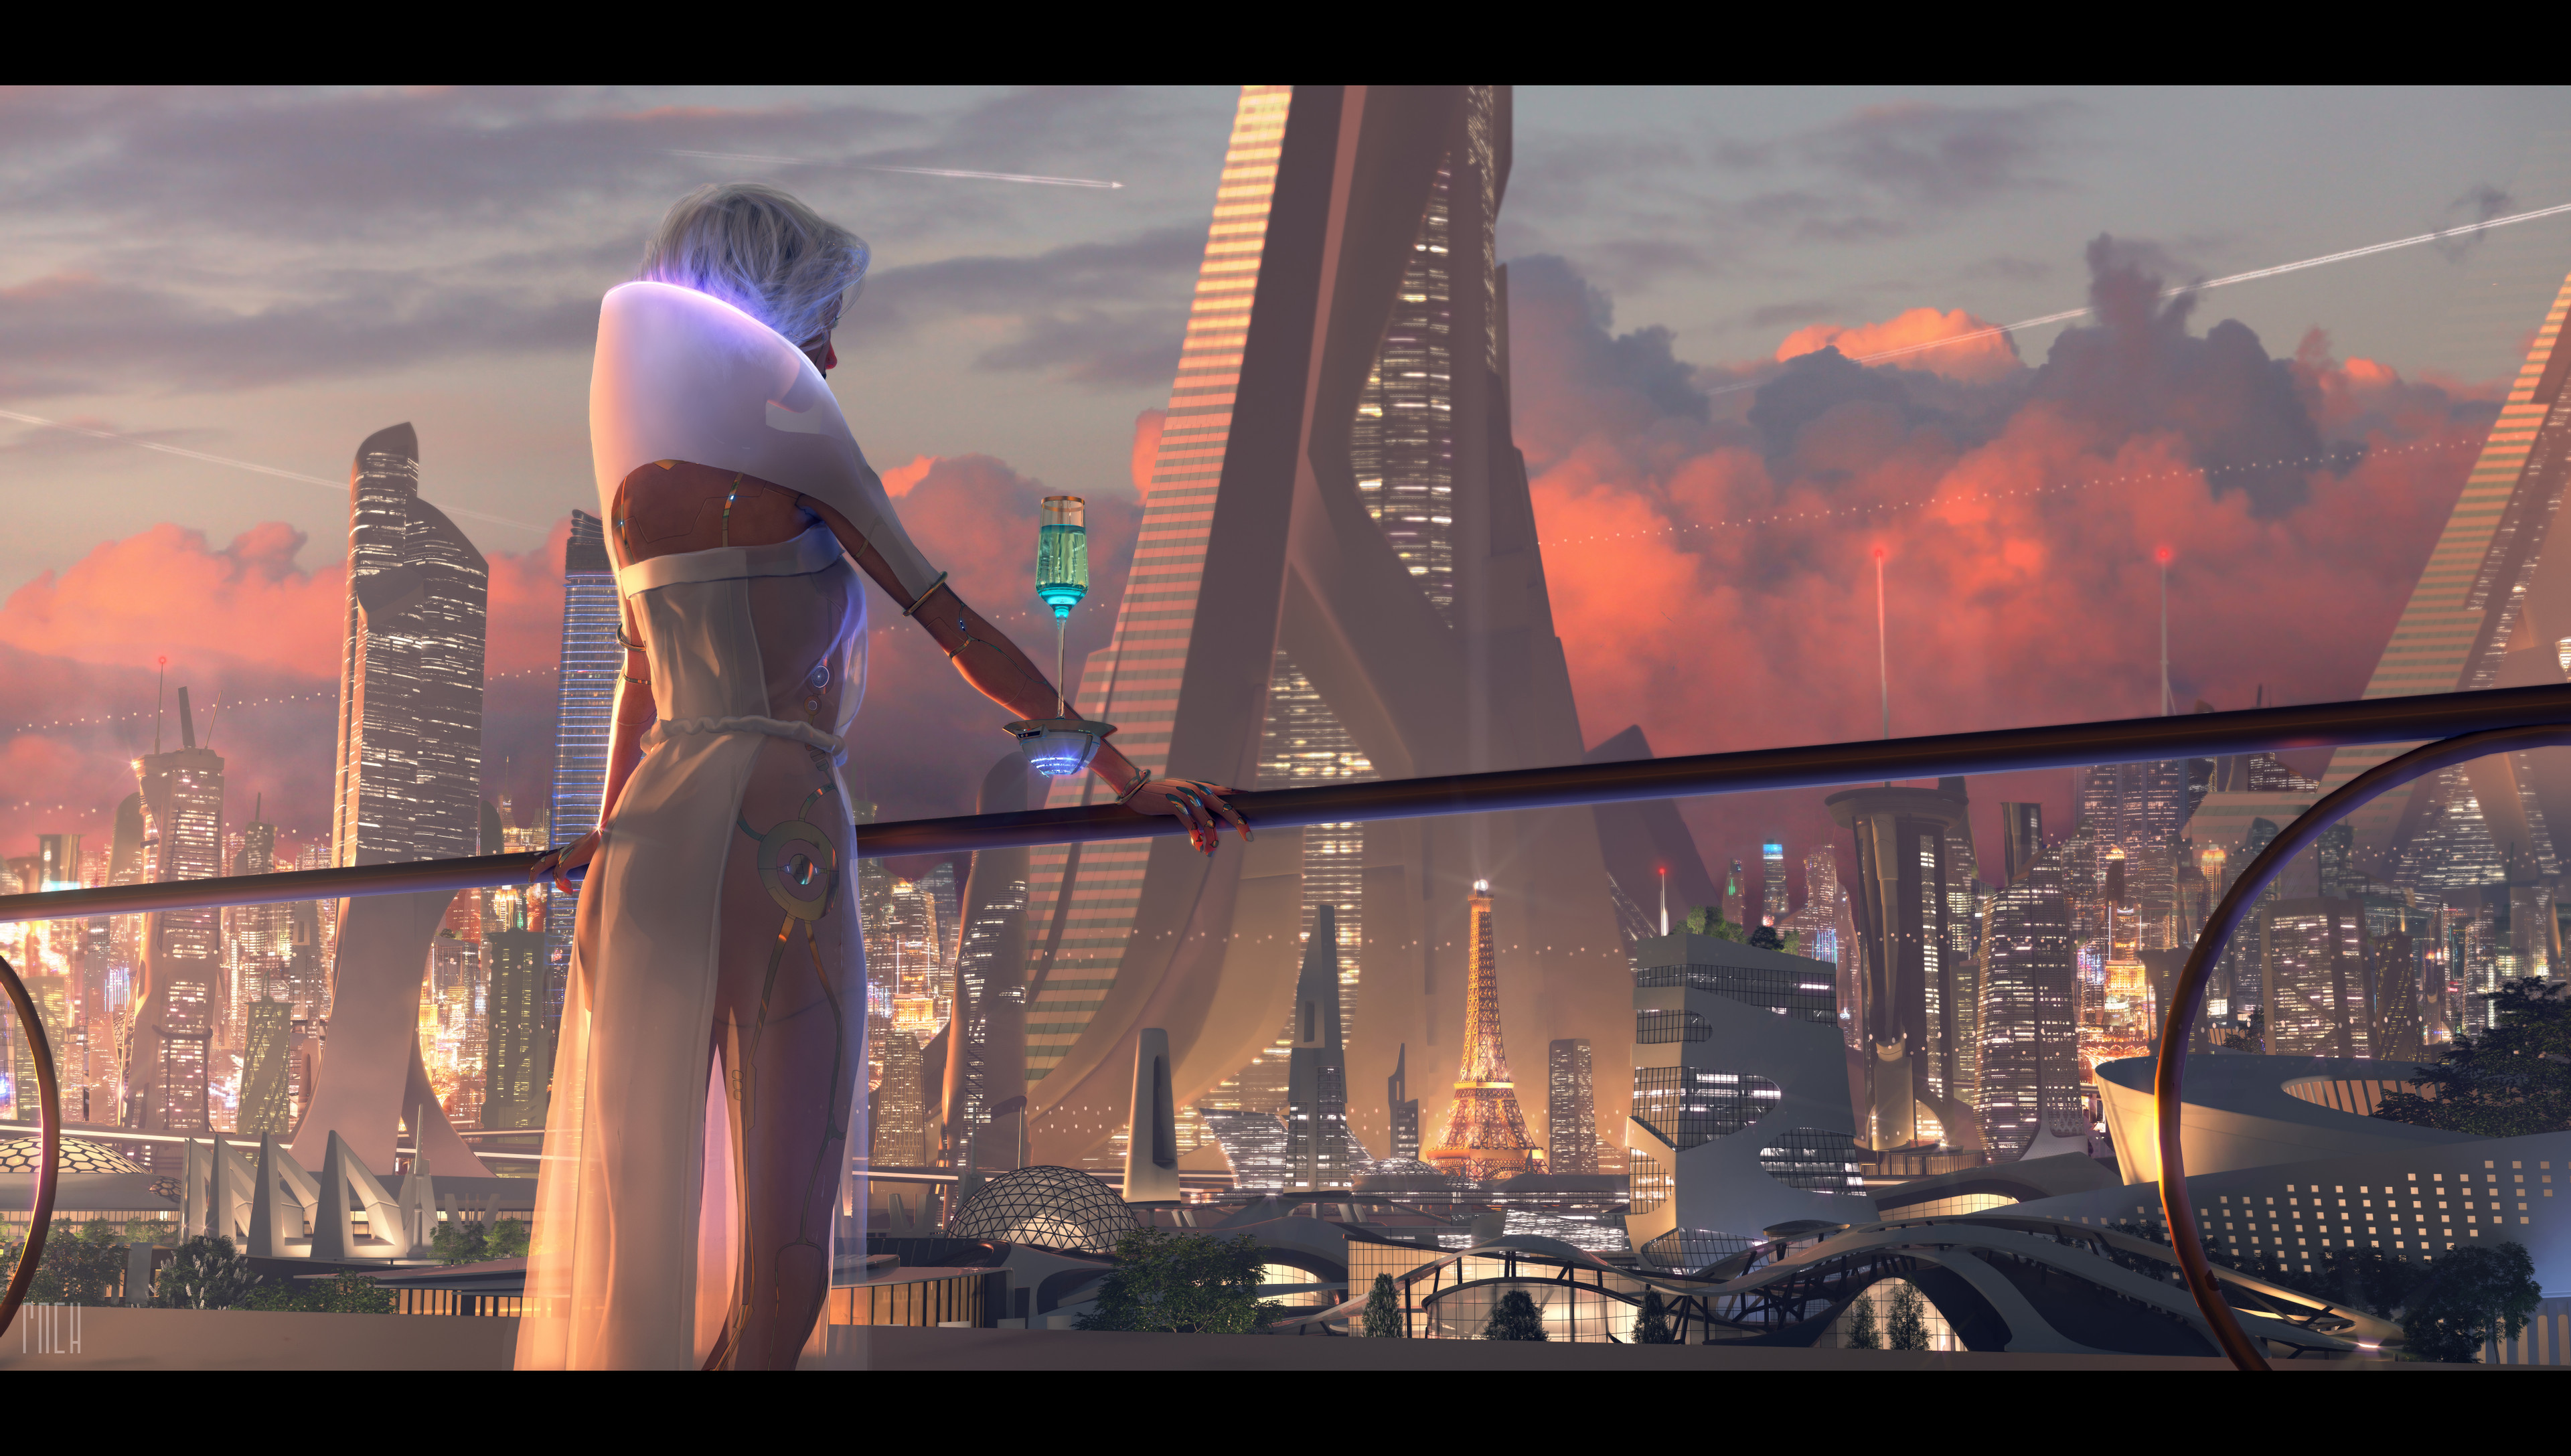 General 3840x2175 Paul Cheptea wine wine glass transparency glass city standing balcony digital art white clothing blonde women white hair cyborg futuristic city city lights ultrawide futuristic red clouds from behind artwork cityscape Paris clouds sky orange clouds cyberpunk ArtStation